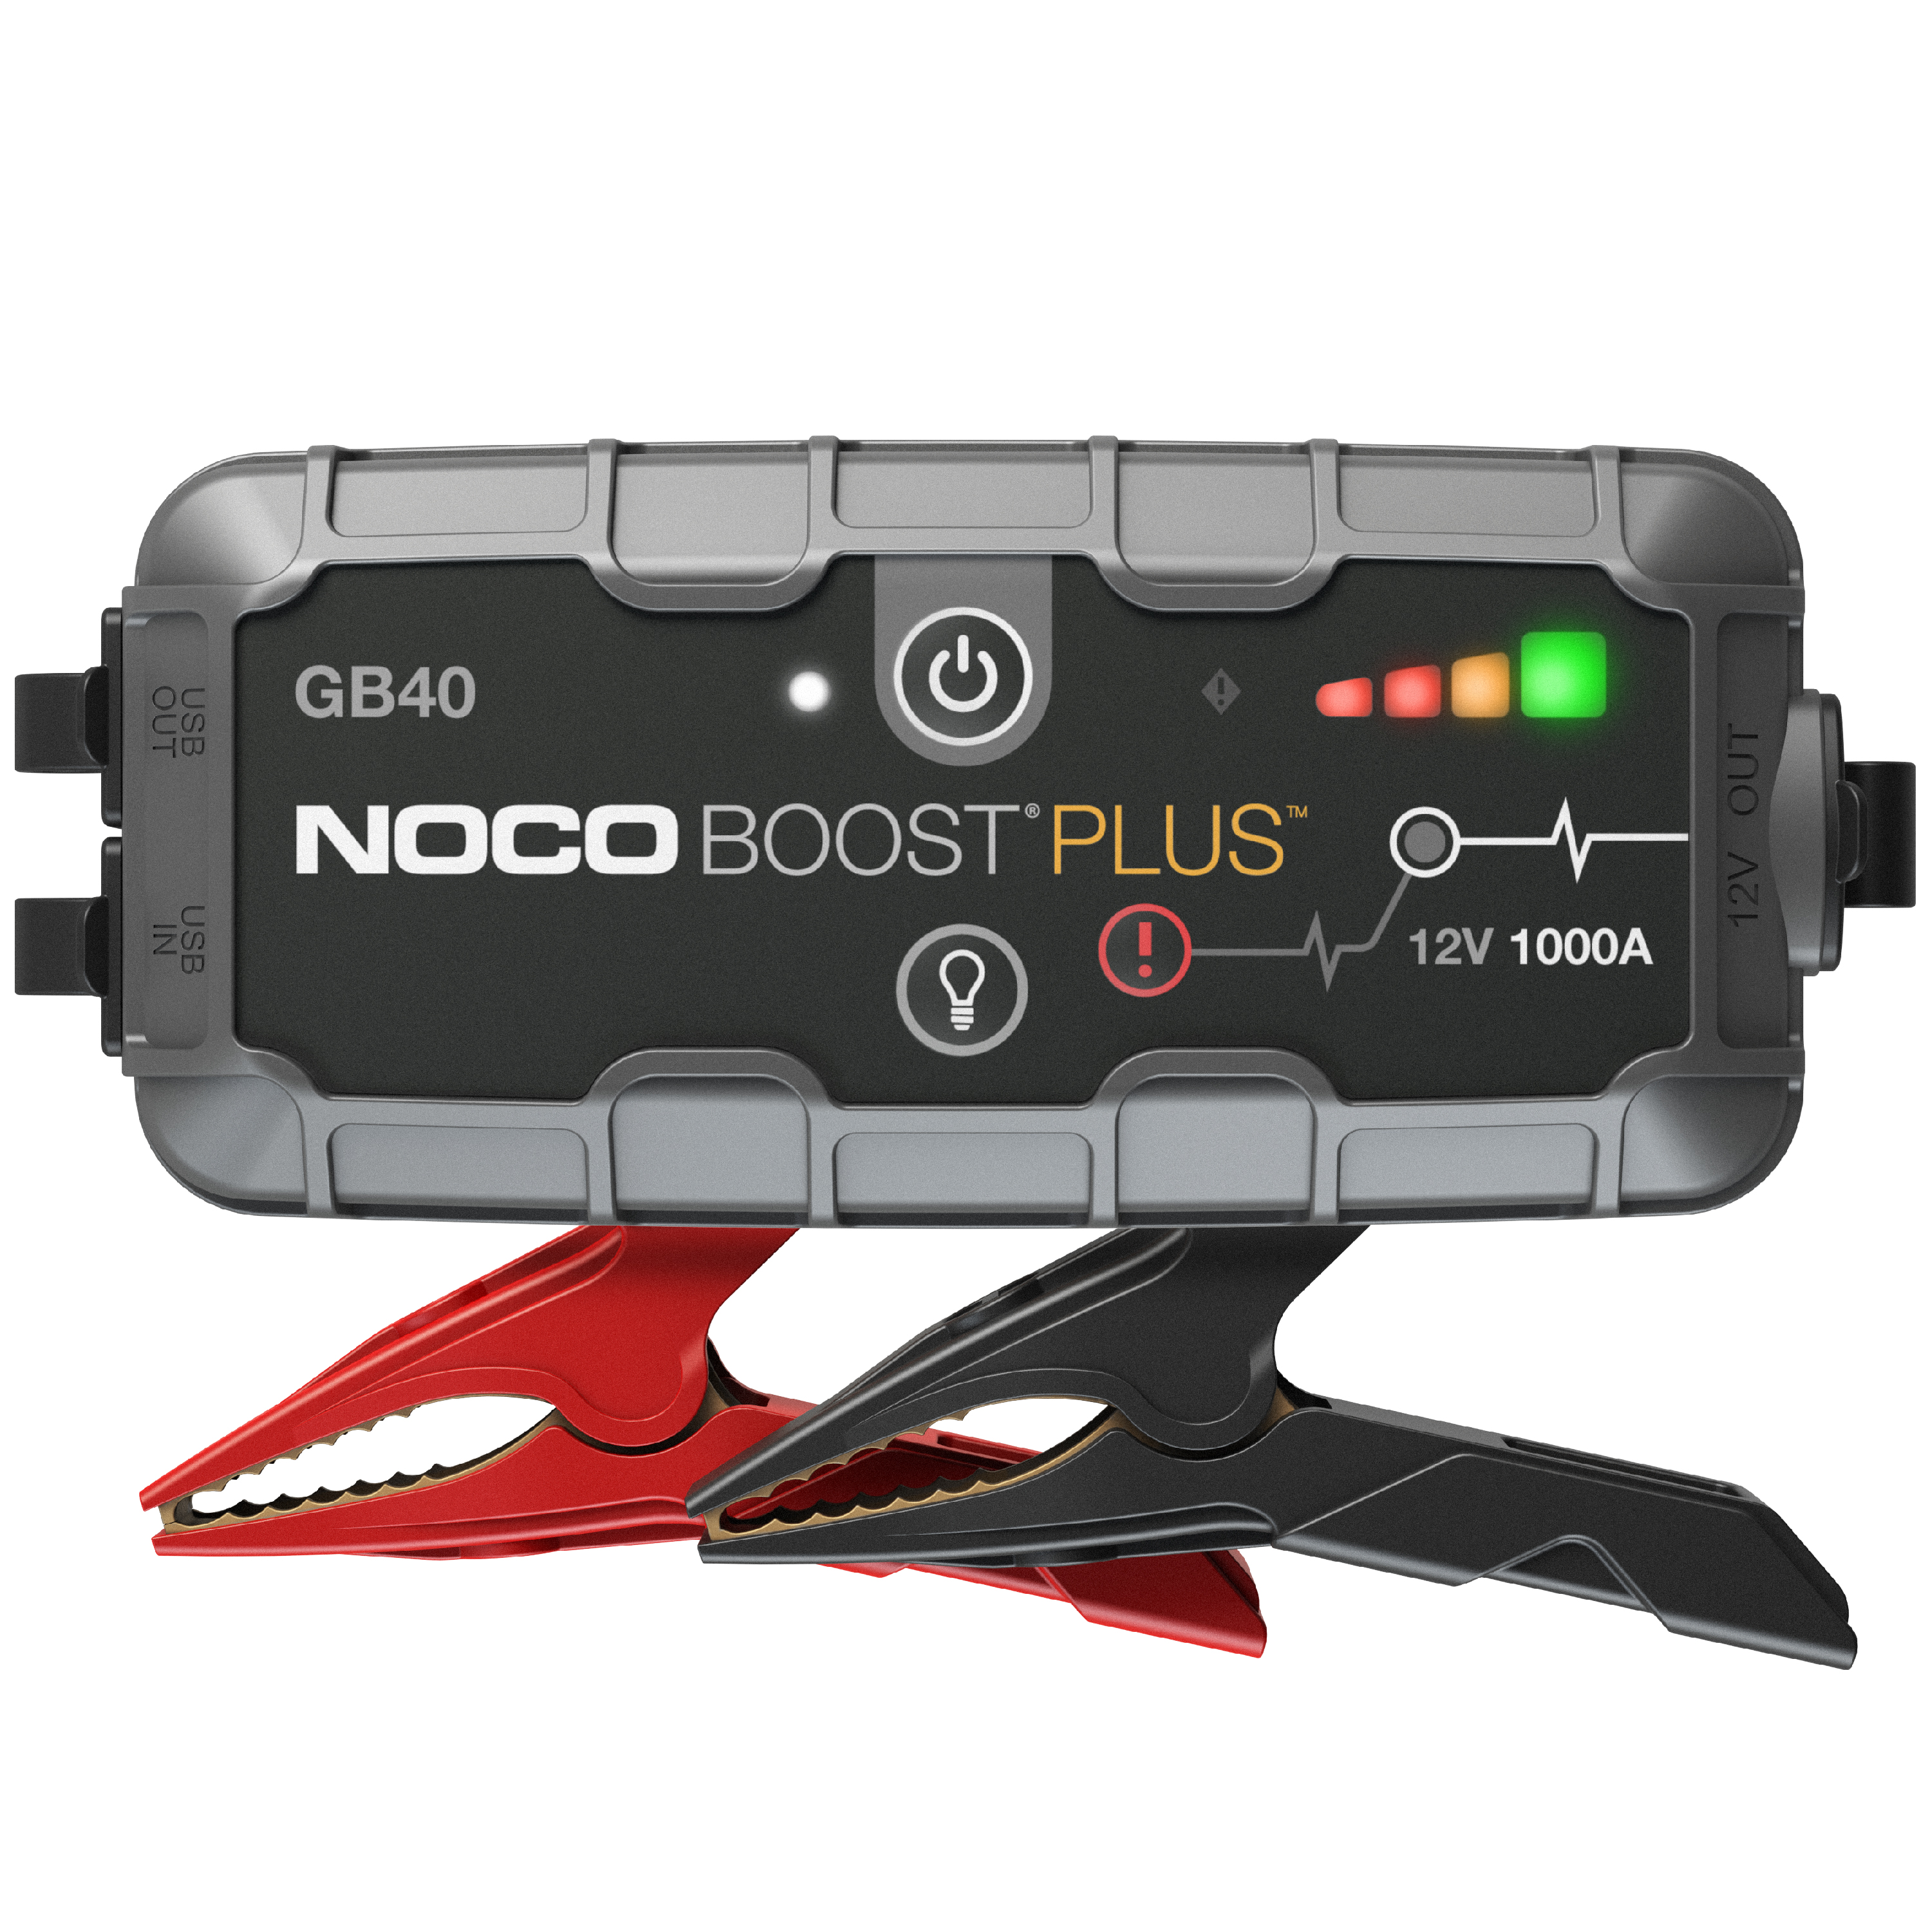 NOCO Boost Plus GB40 1000A 12V UltraSafe Portable Lithium Jump Starter - image 1 of 7